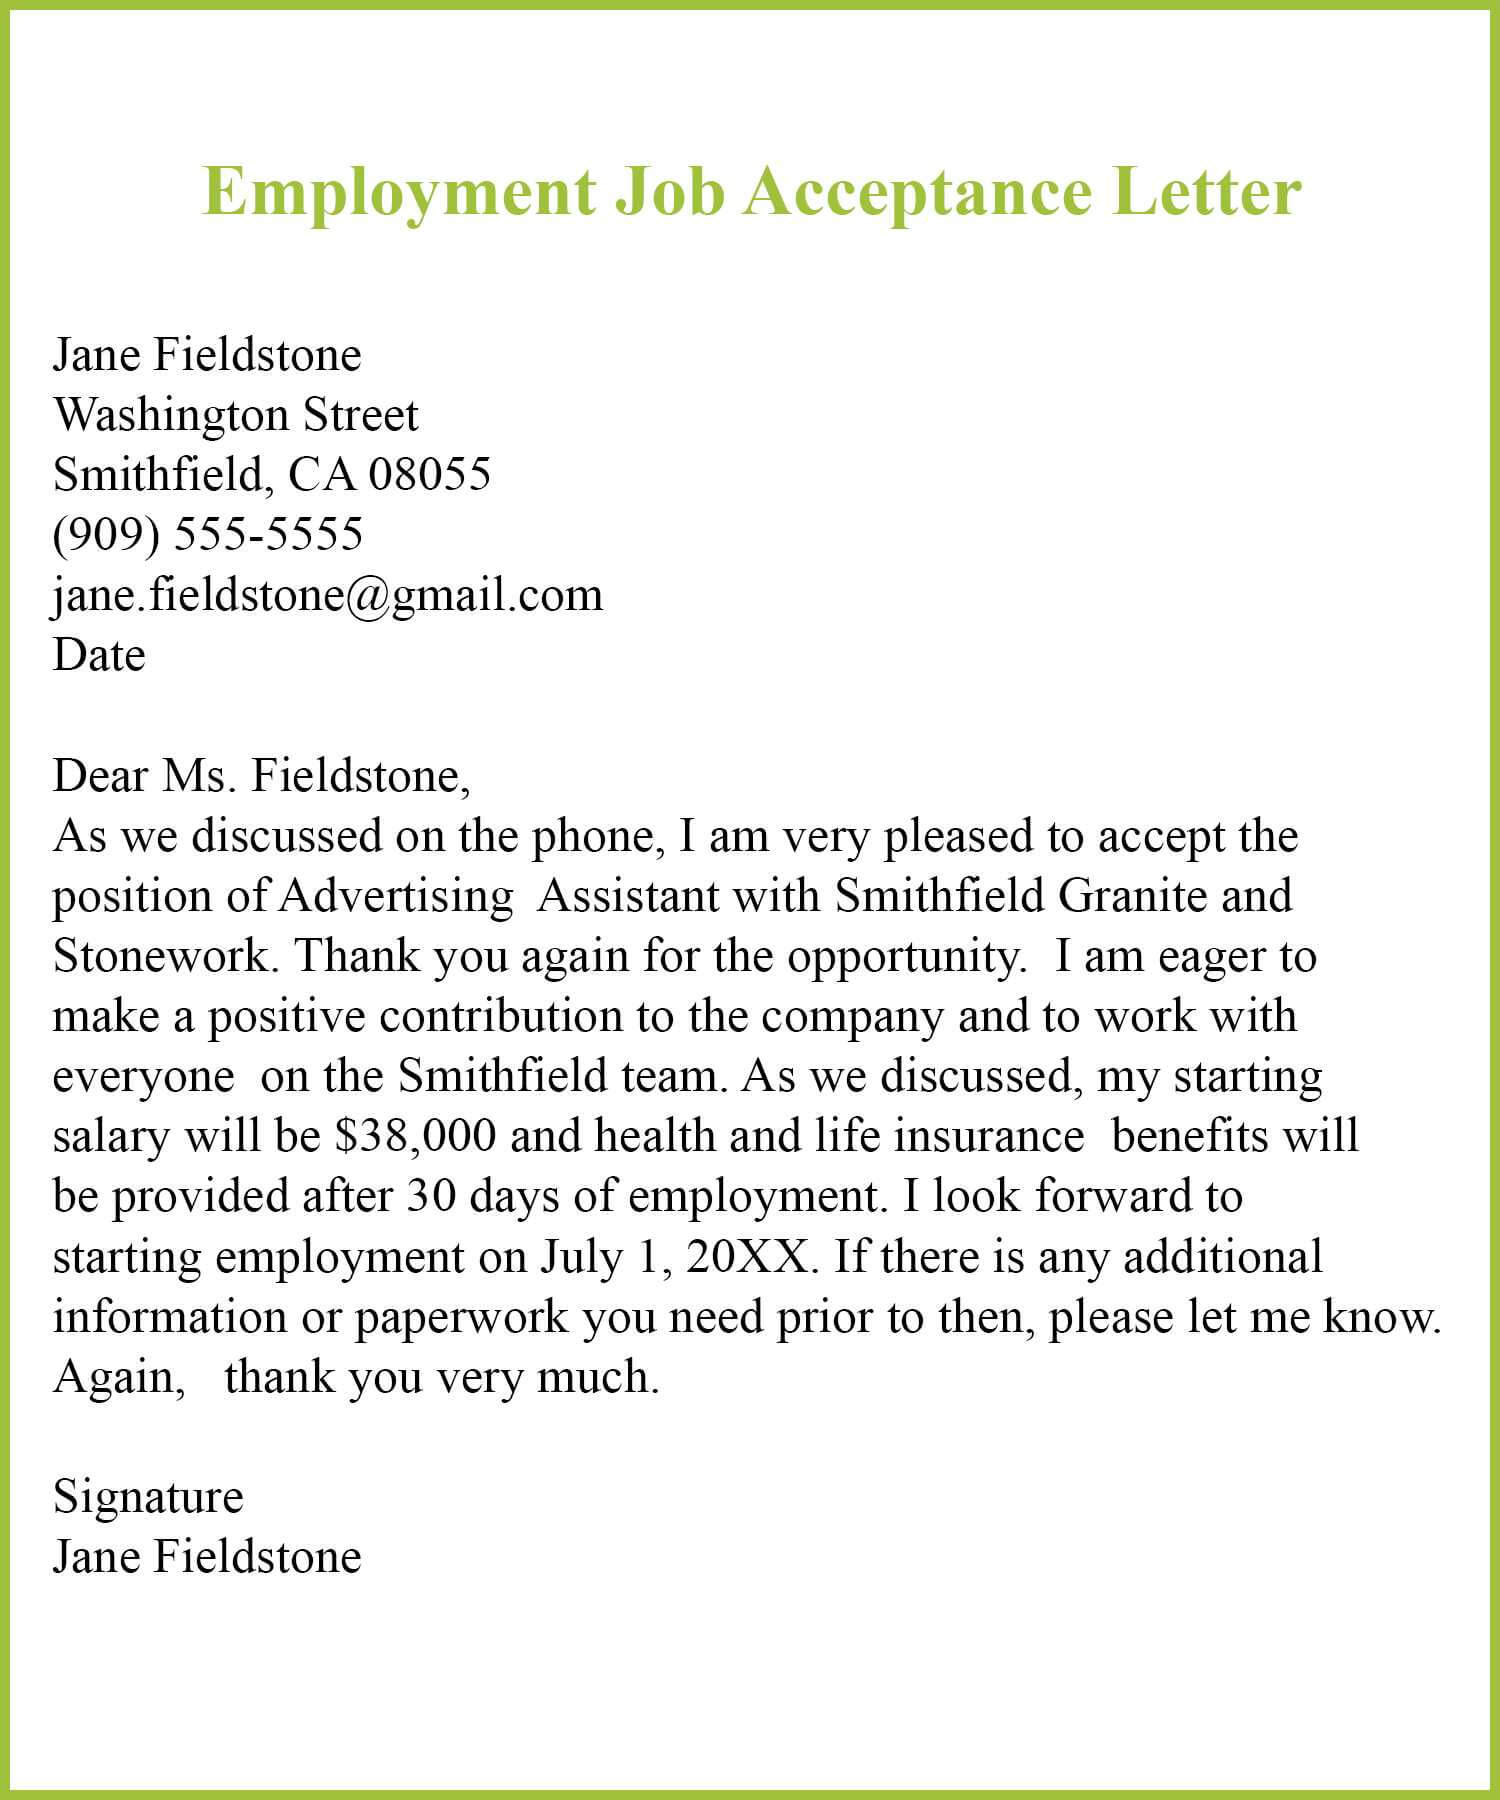 020 Employment Job Acceptance Template Ideas Letter Pertaining To Certificate Of Acceptance Template